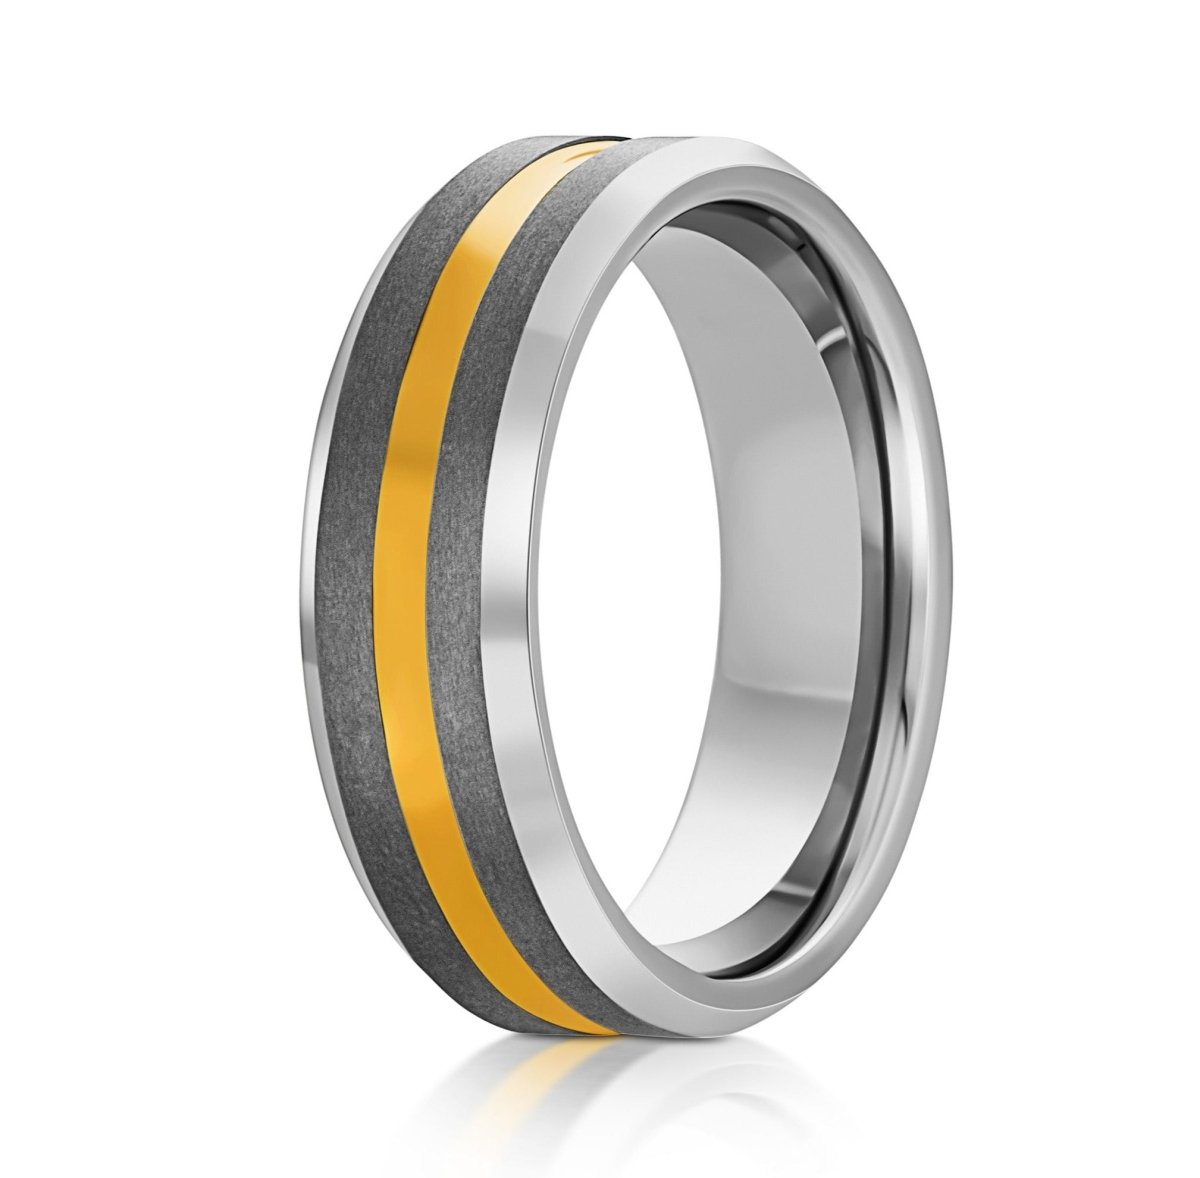 ON SALE, Affordable Men's Tungsten Carbide Rings